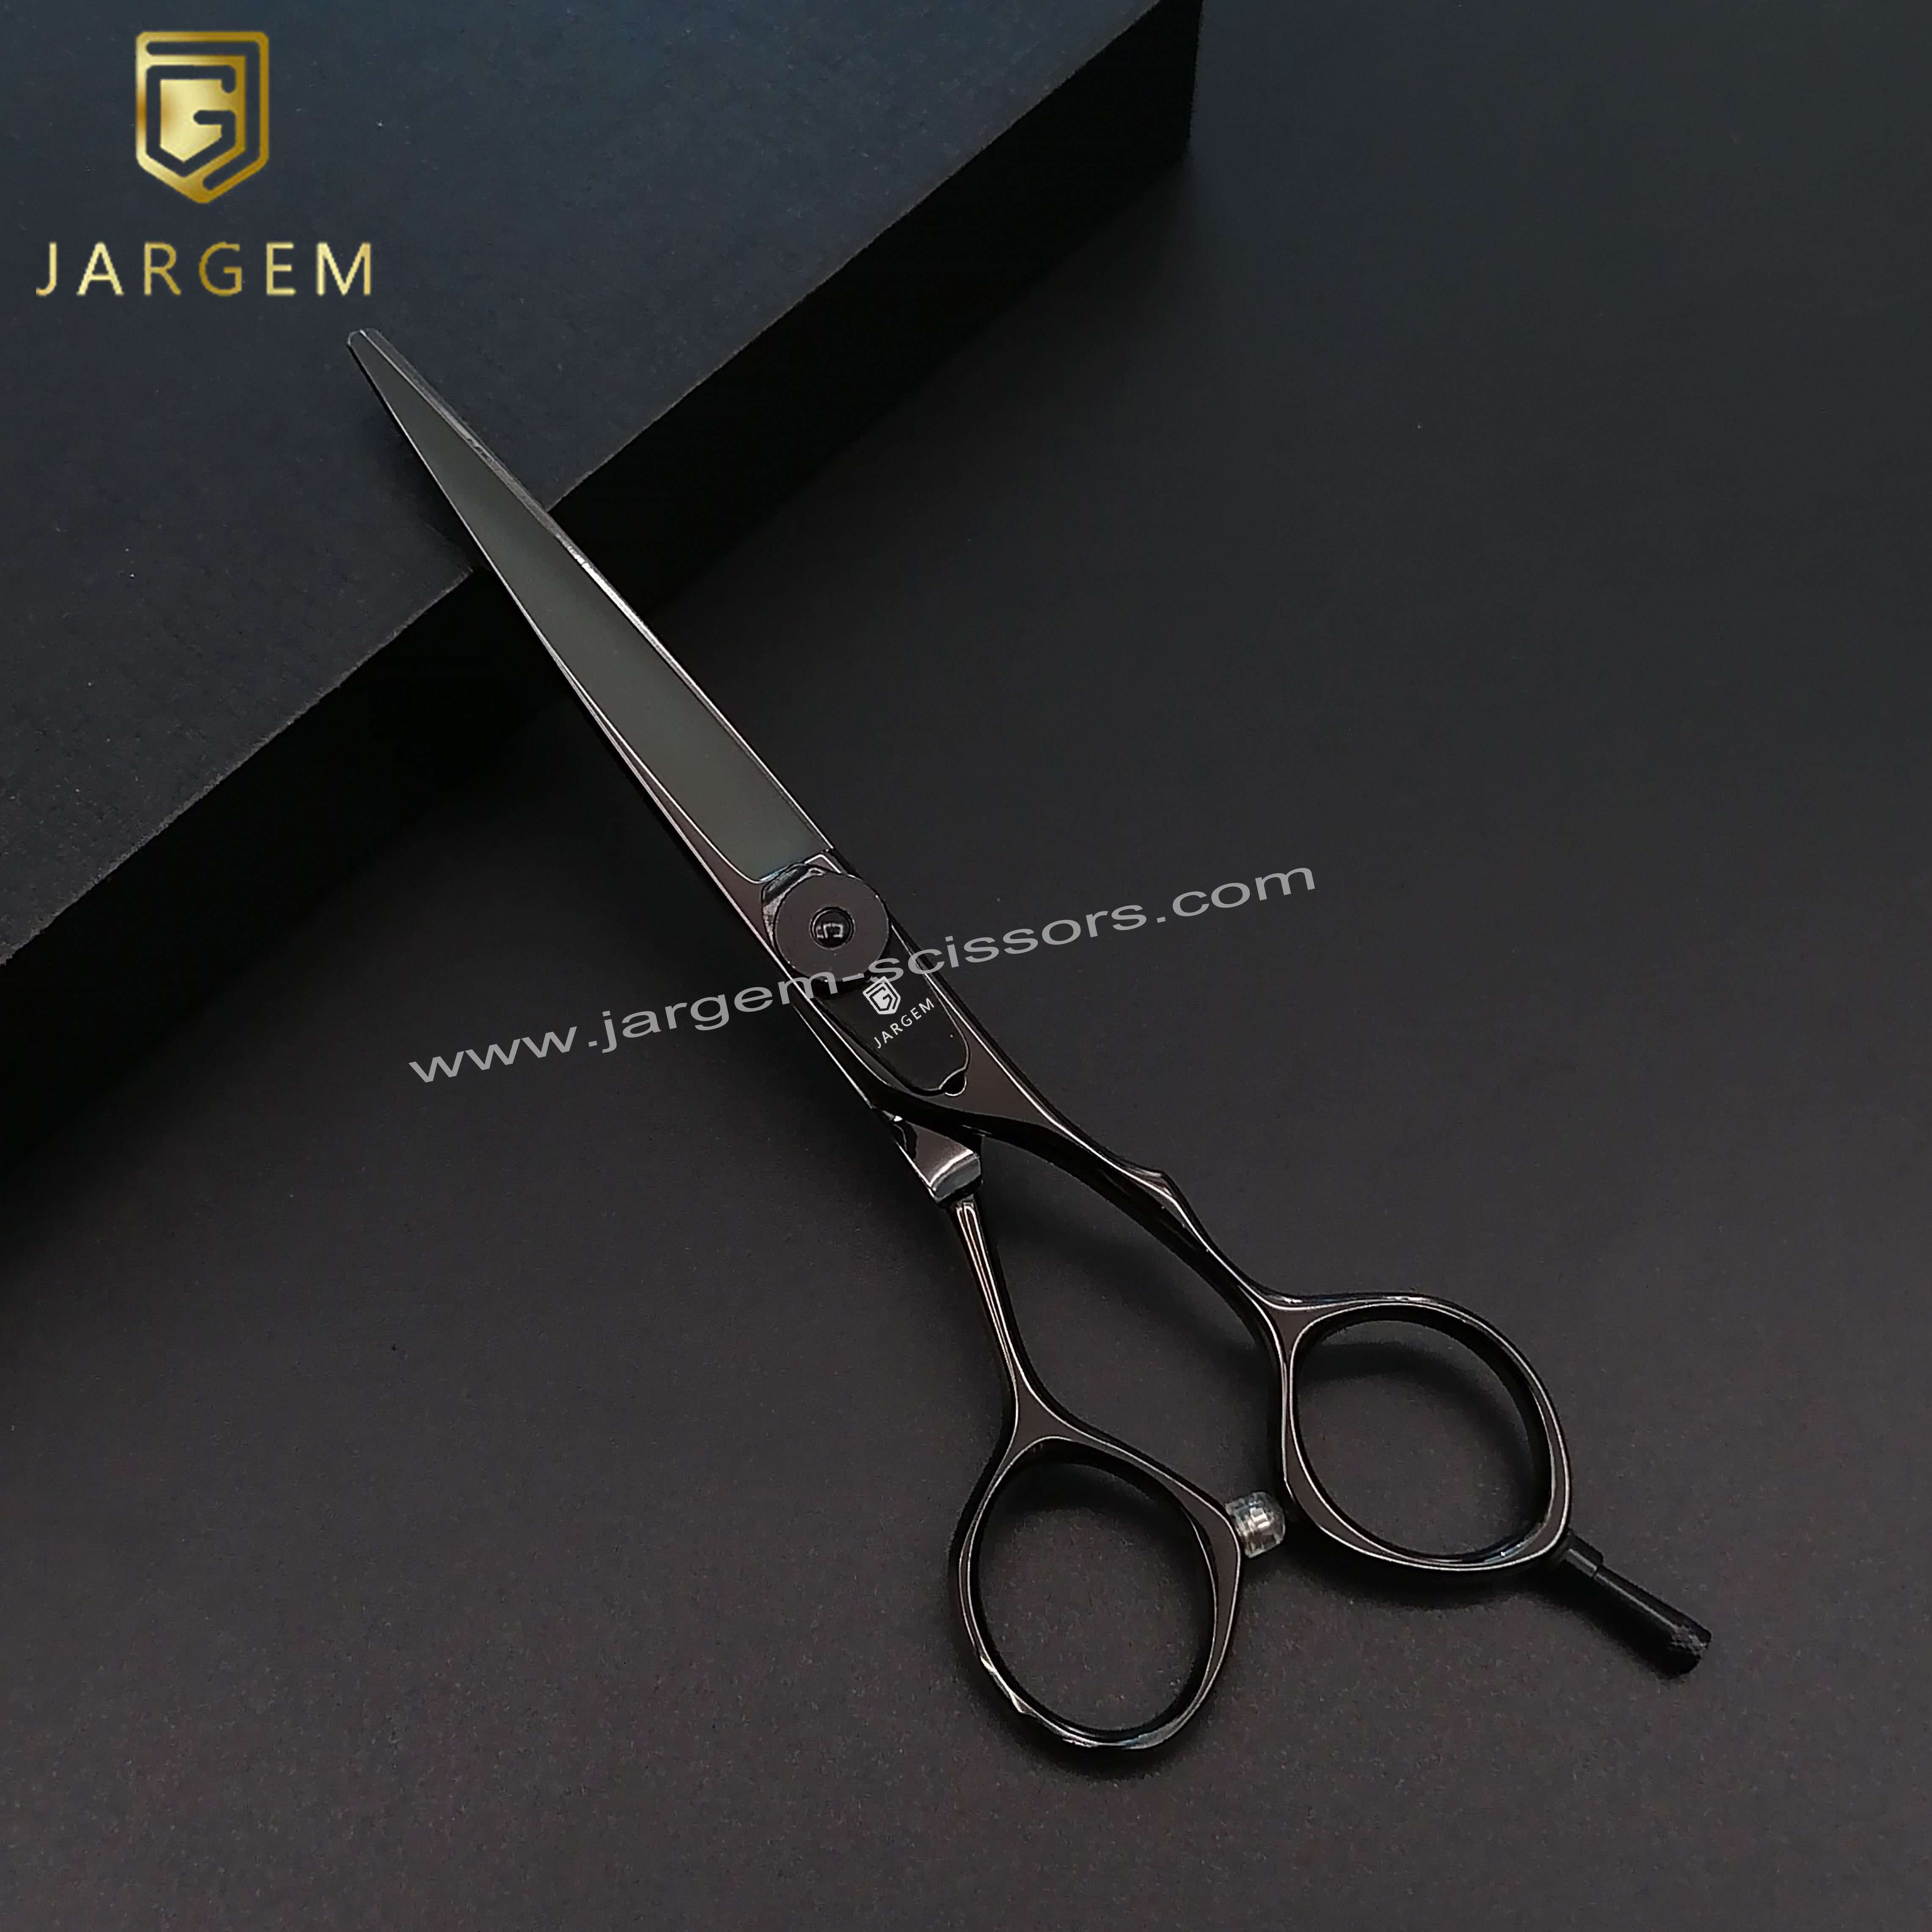 Special Black Coated Beauty Hair Cutting Scissors 5.5 Inch Barber Scissors